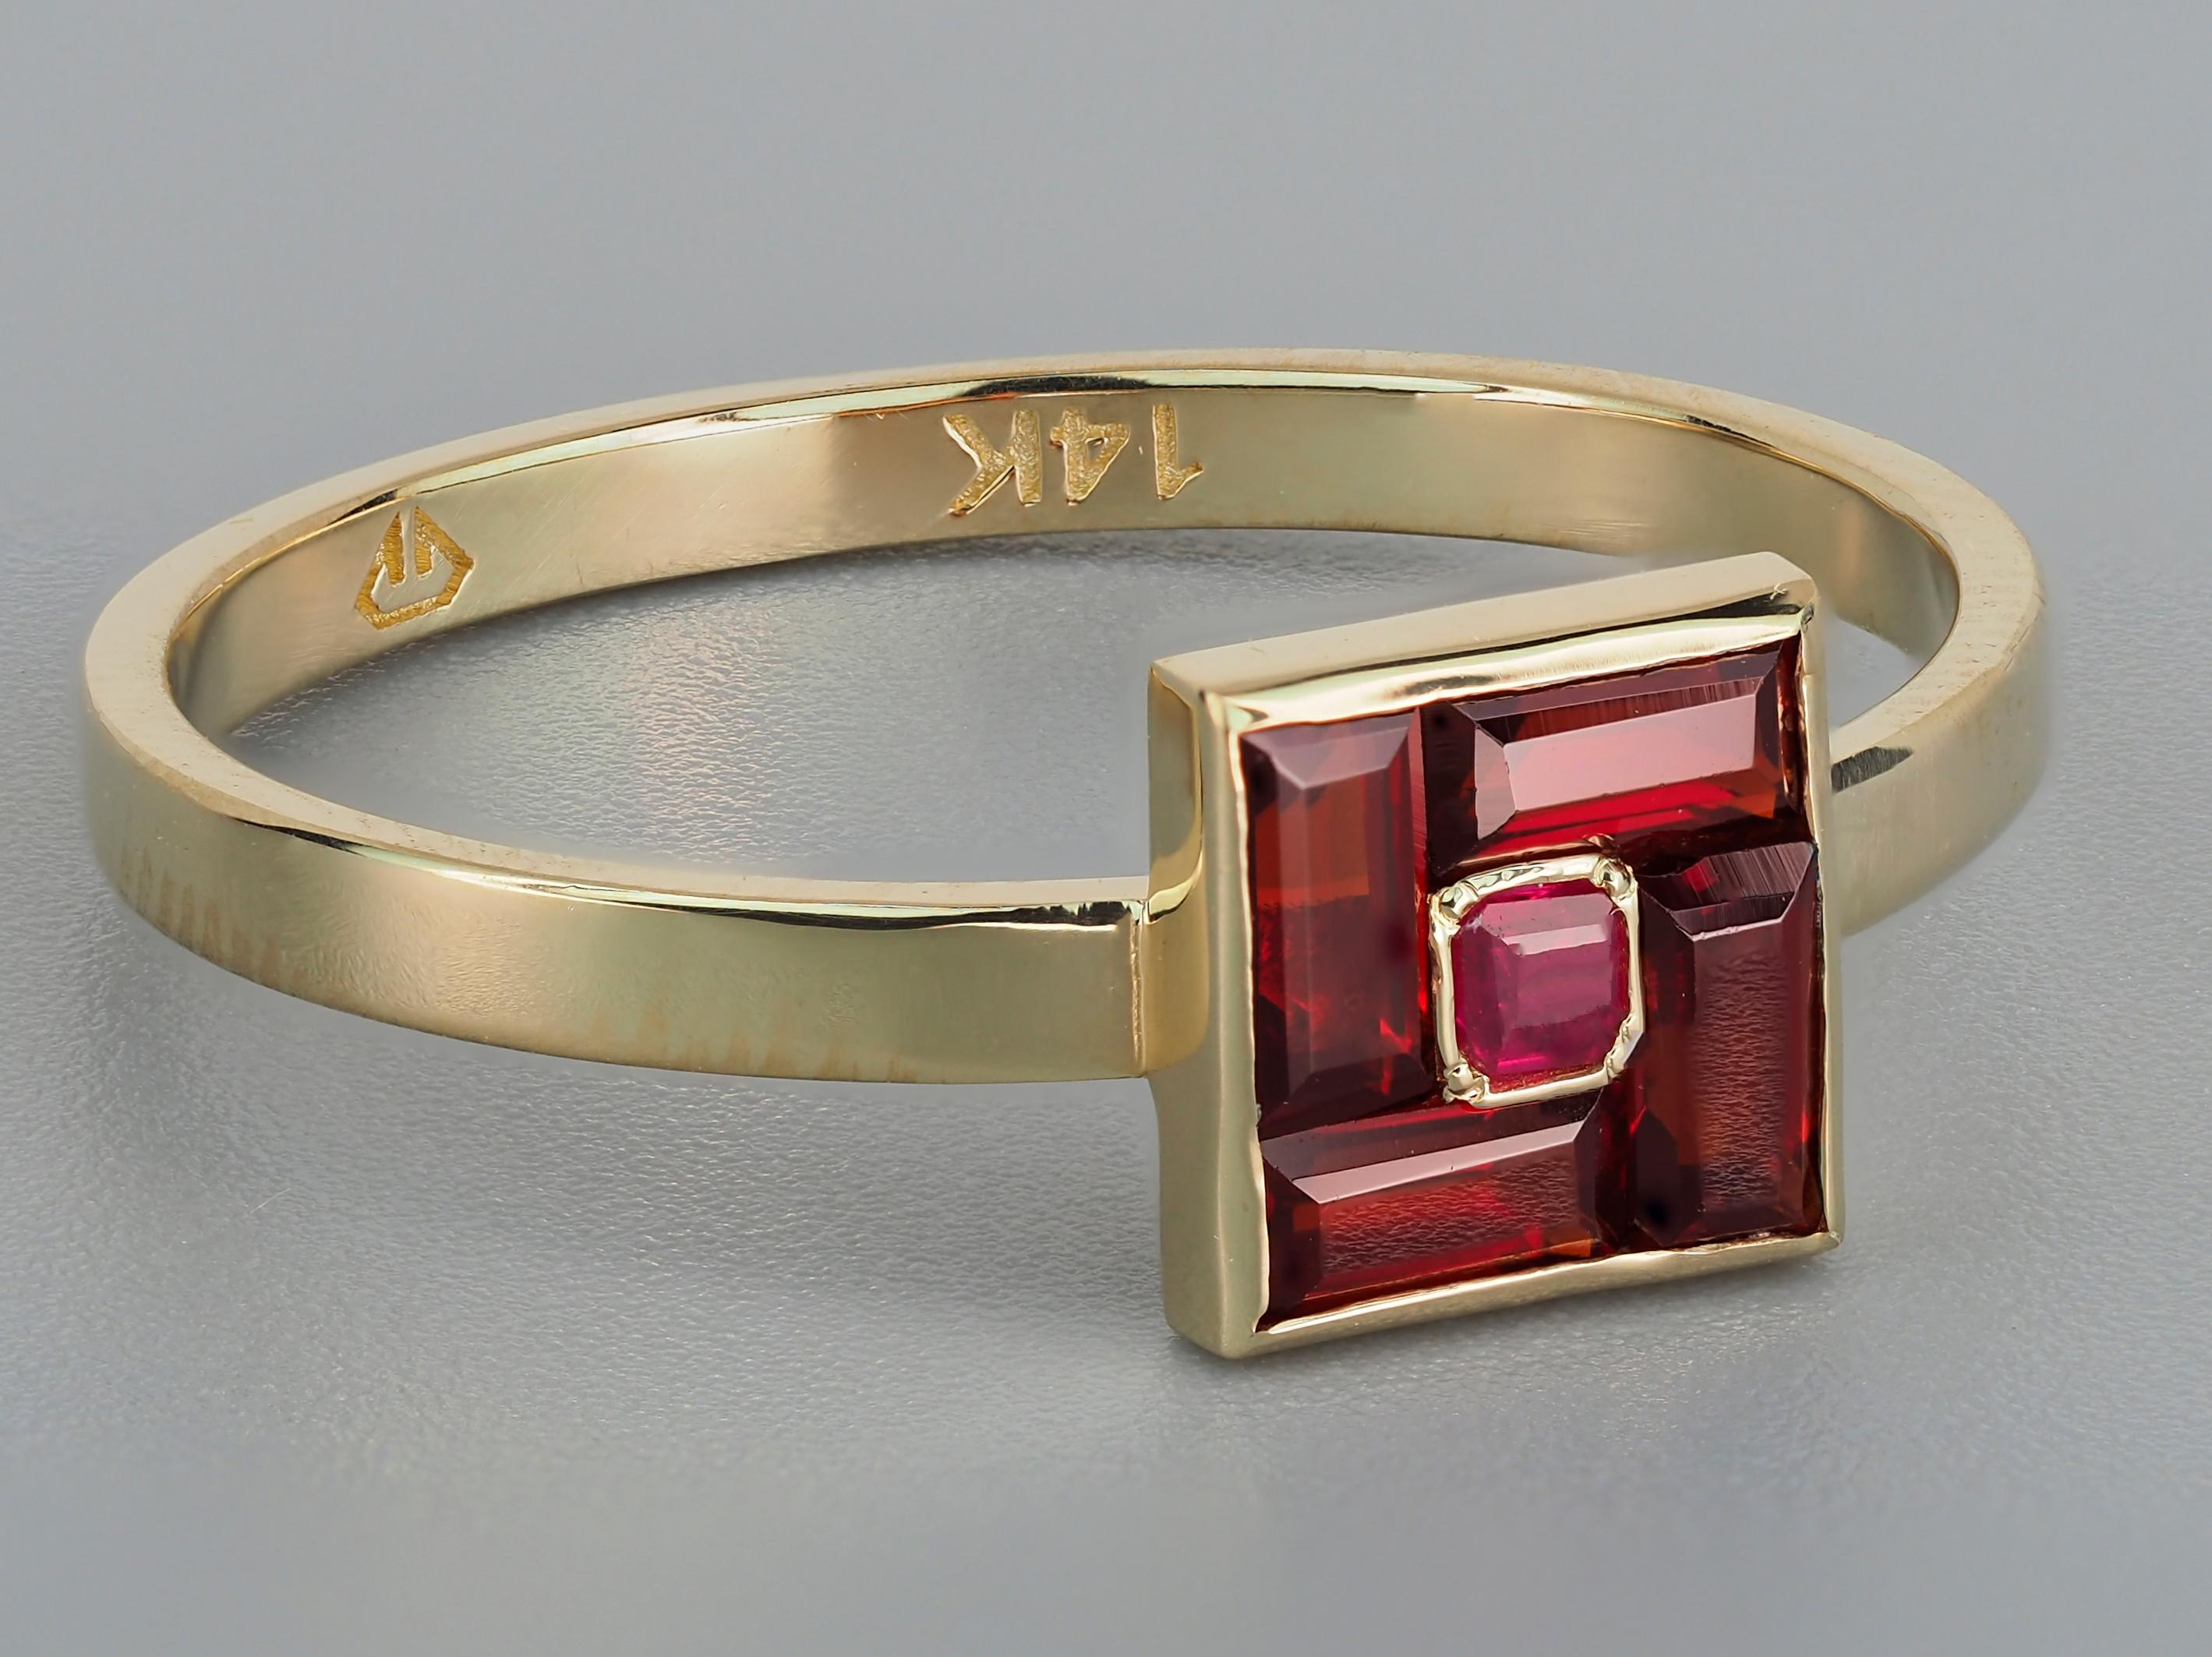 14k Gold ring with garnets and ruby.

Weight: 1.4 g. depends from size
Metal: 14k marked

Set with garnets:
Baguette shape, red color, aprx 0.6 ct total (4x015. ct)
Clarity: SI

Ruby: princess cut, G/VS, 0.10 ct., red color - 1 piece

auction